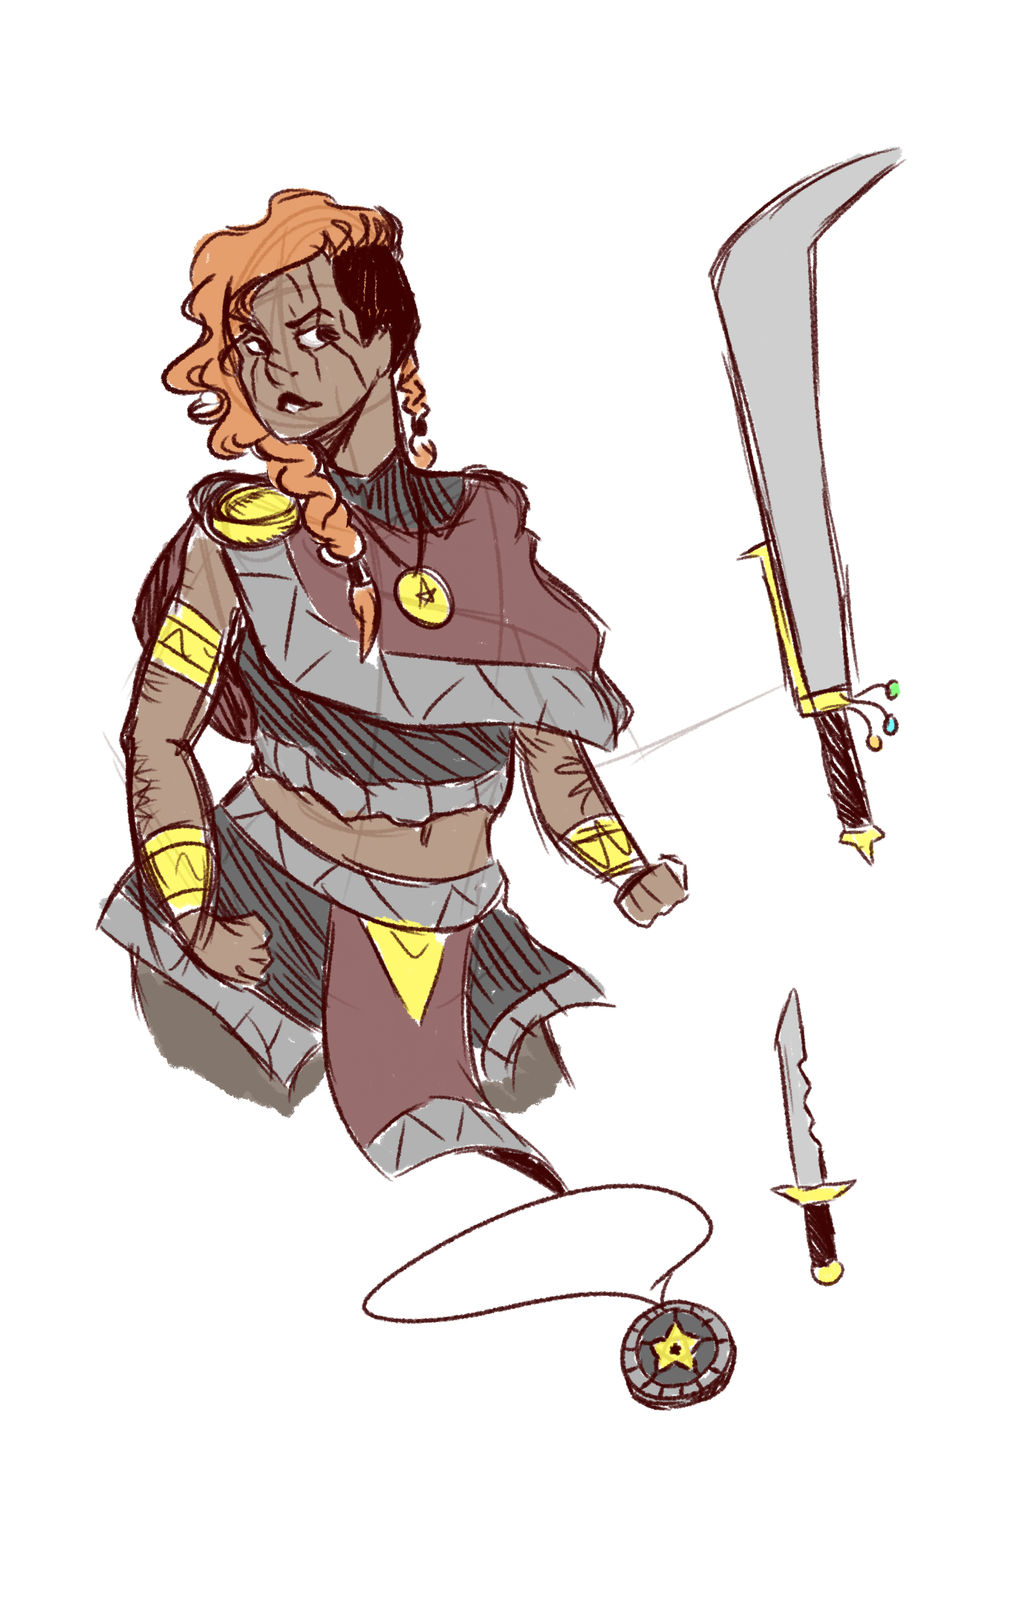 Lucinda The Ragged - Human! Warriors Oc [SKETCH] by Hecate-Art on ...